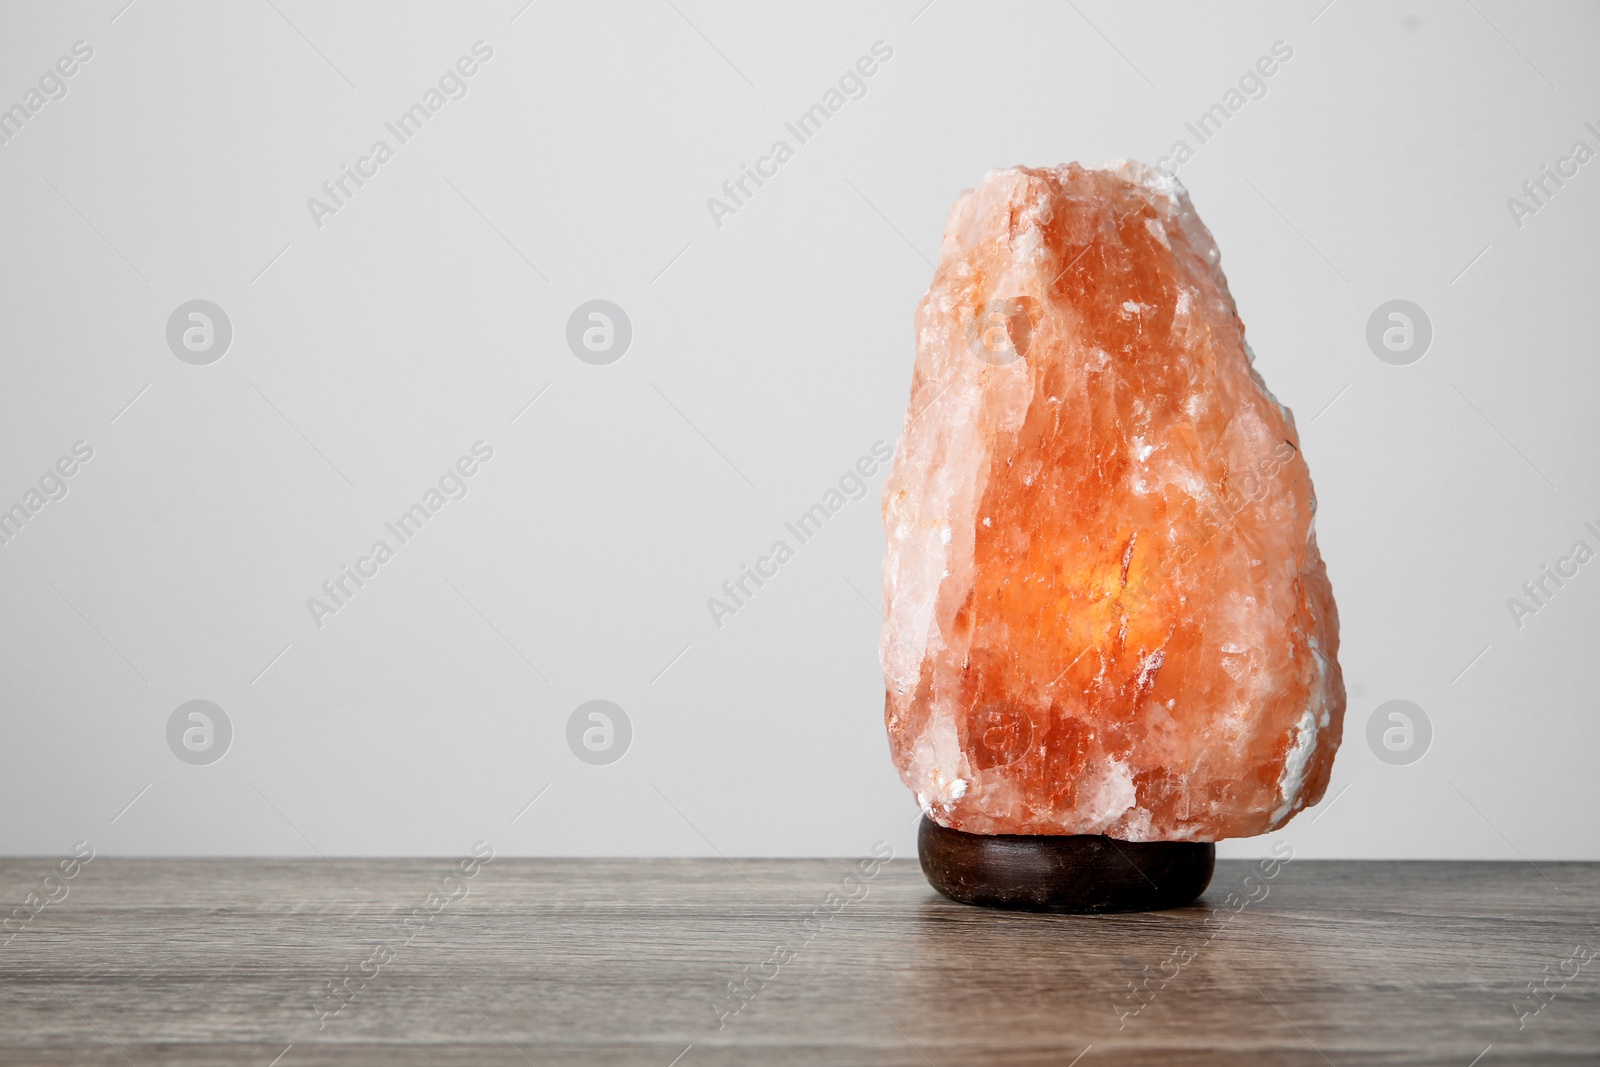 Photo of Himalayan salt lamp on table against light background